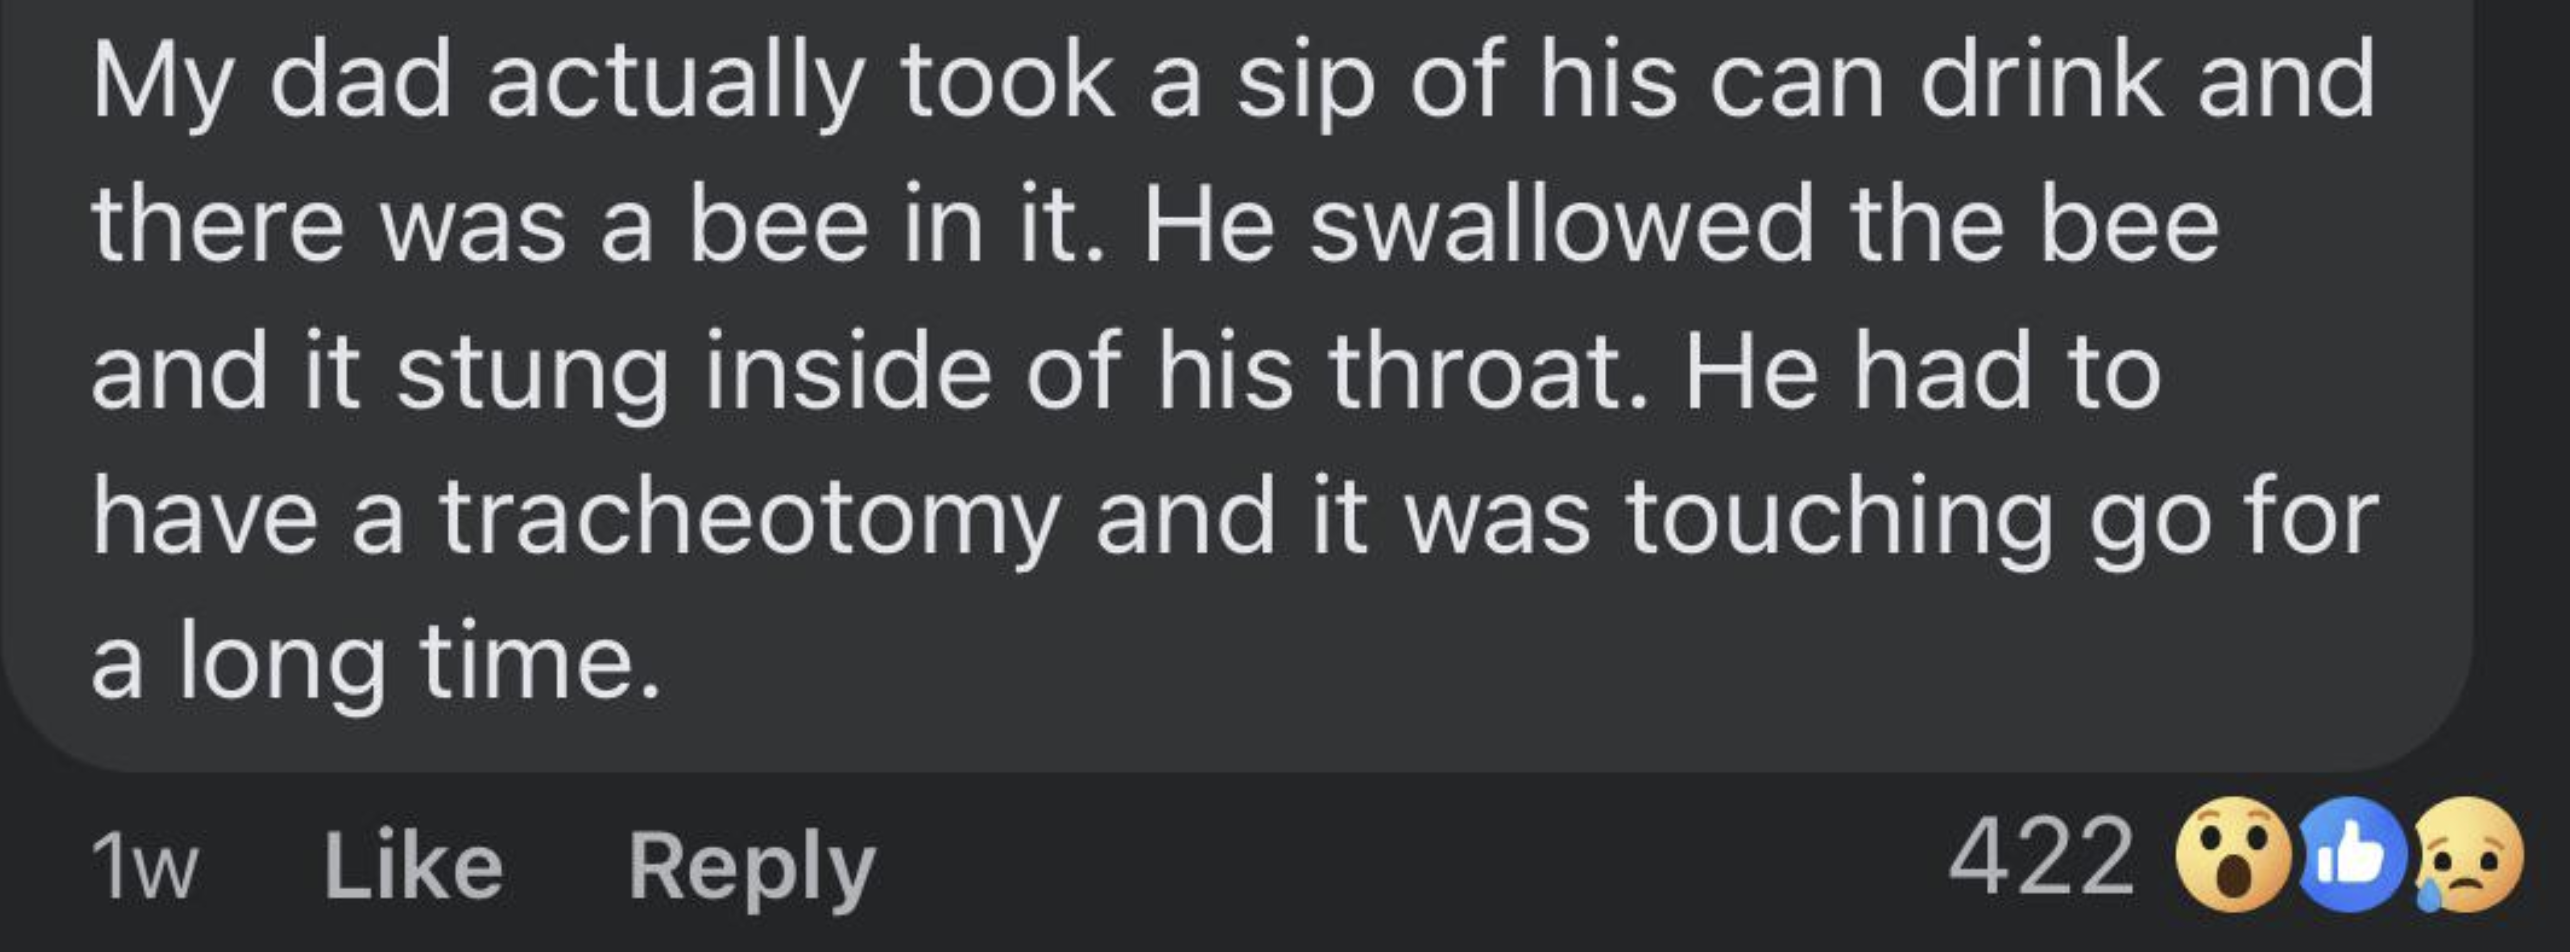 screenshot - My dad actually took a sip of his can drink and there was a bee in it. He swallowed the bee and it stung inside of his throat. He had to have a tracheotomy and it was touching go for a long time. 1w 422